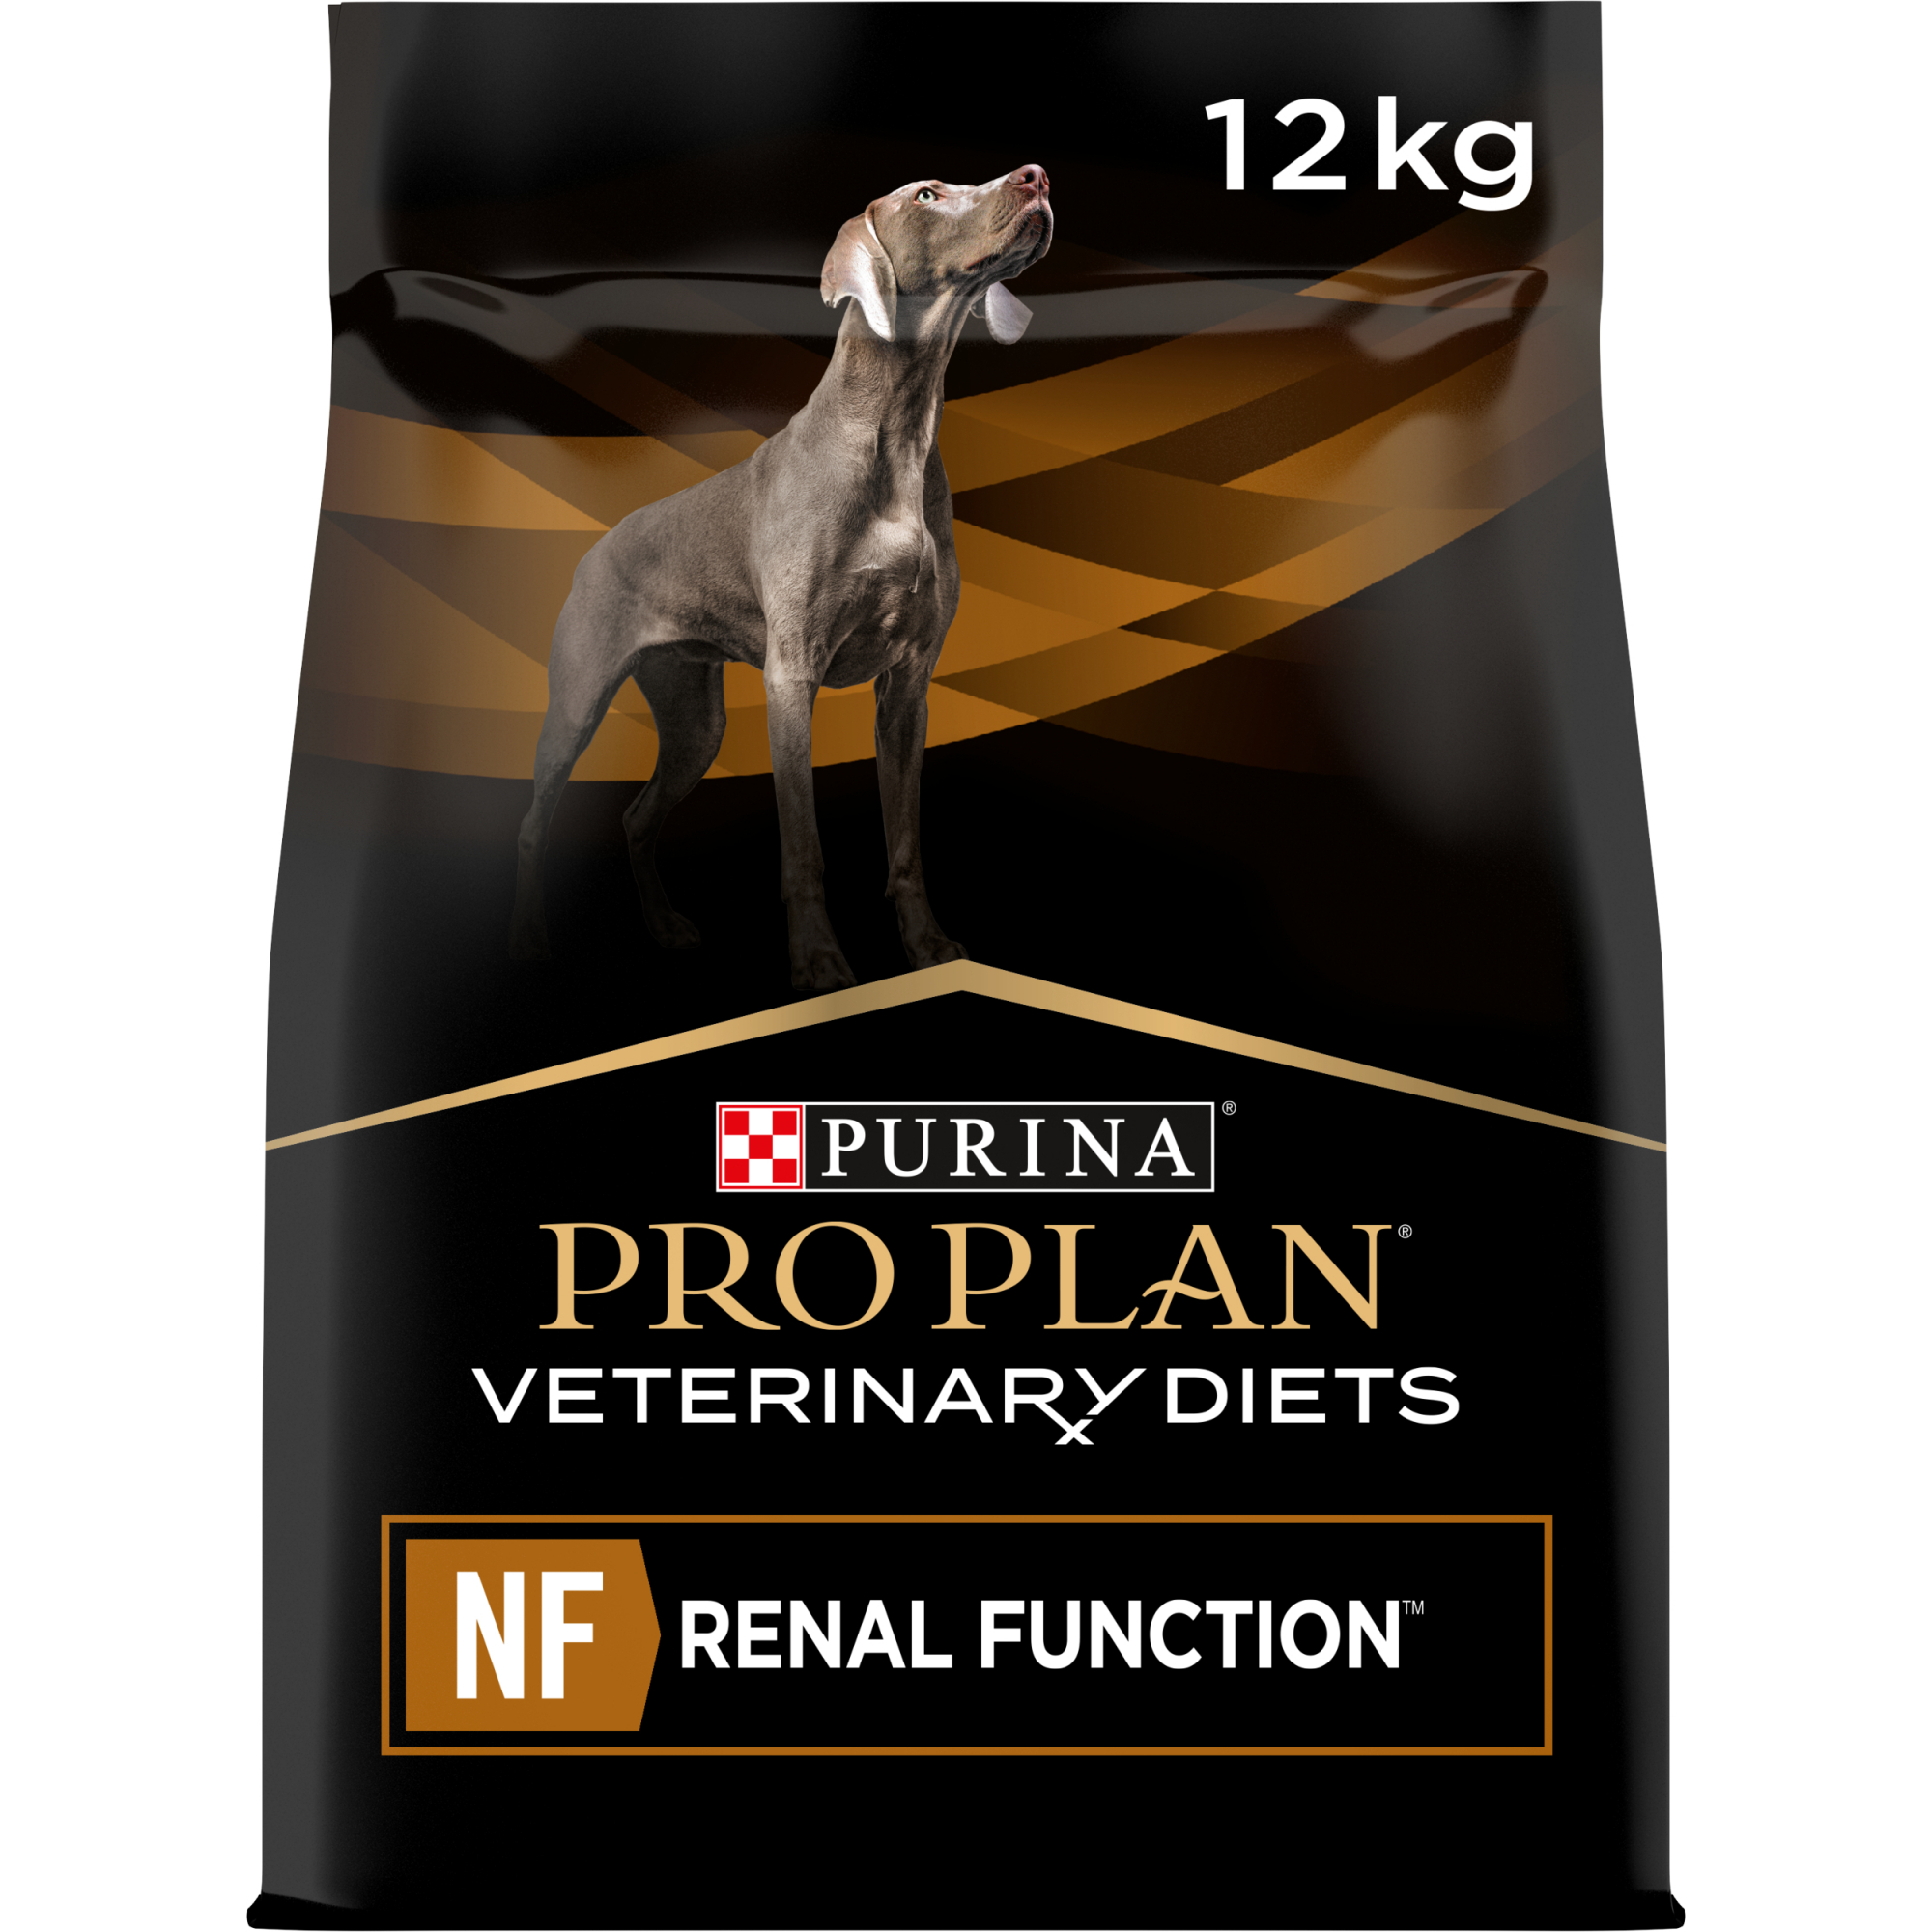 Pro Plan Veterinary Diets NF Renal Function